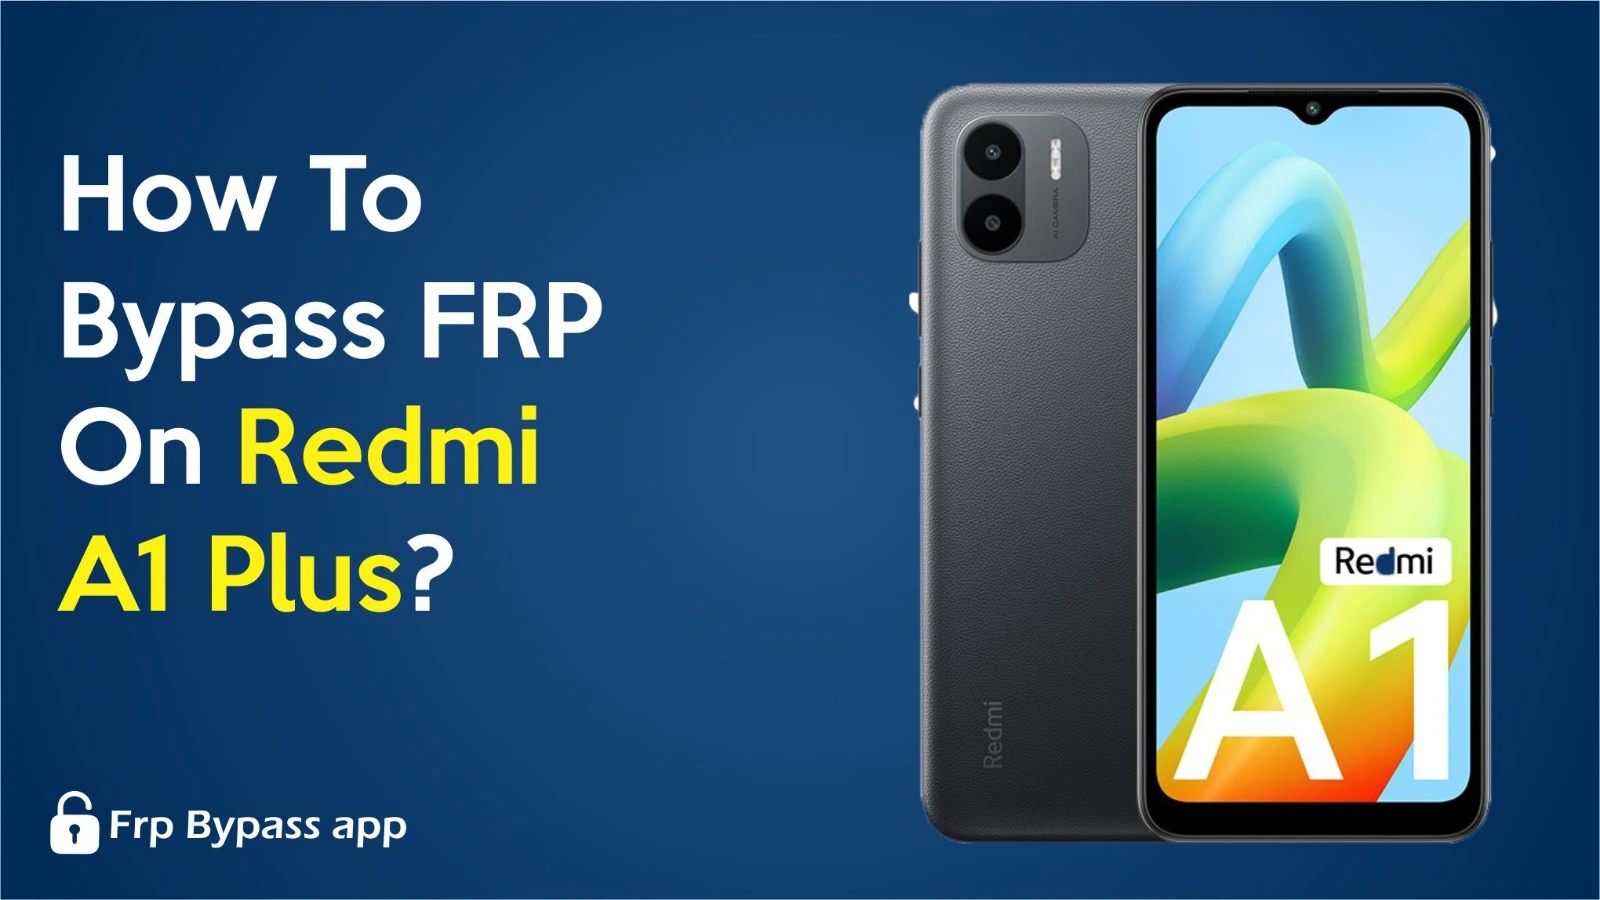 Bypass FRP On Redmi A1 Plus image